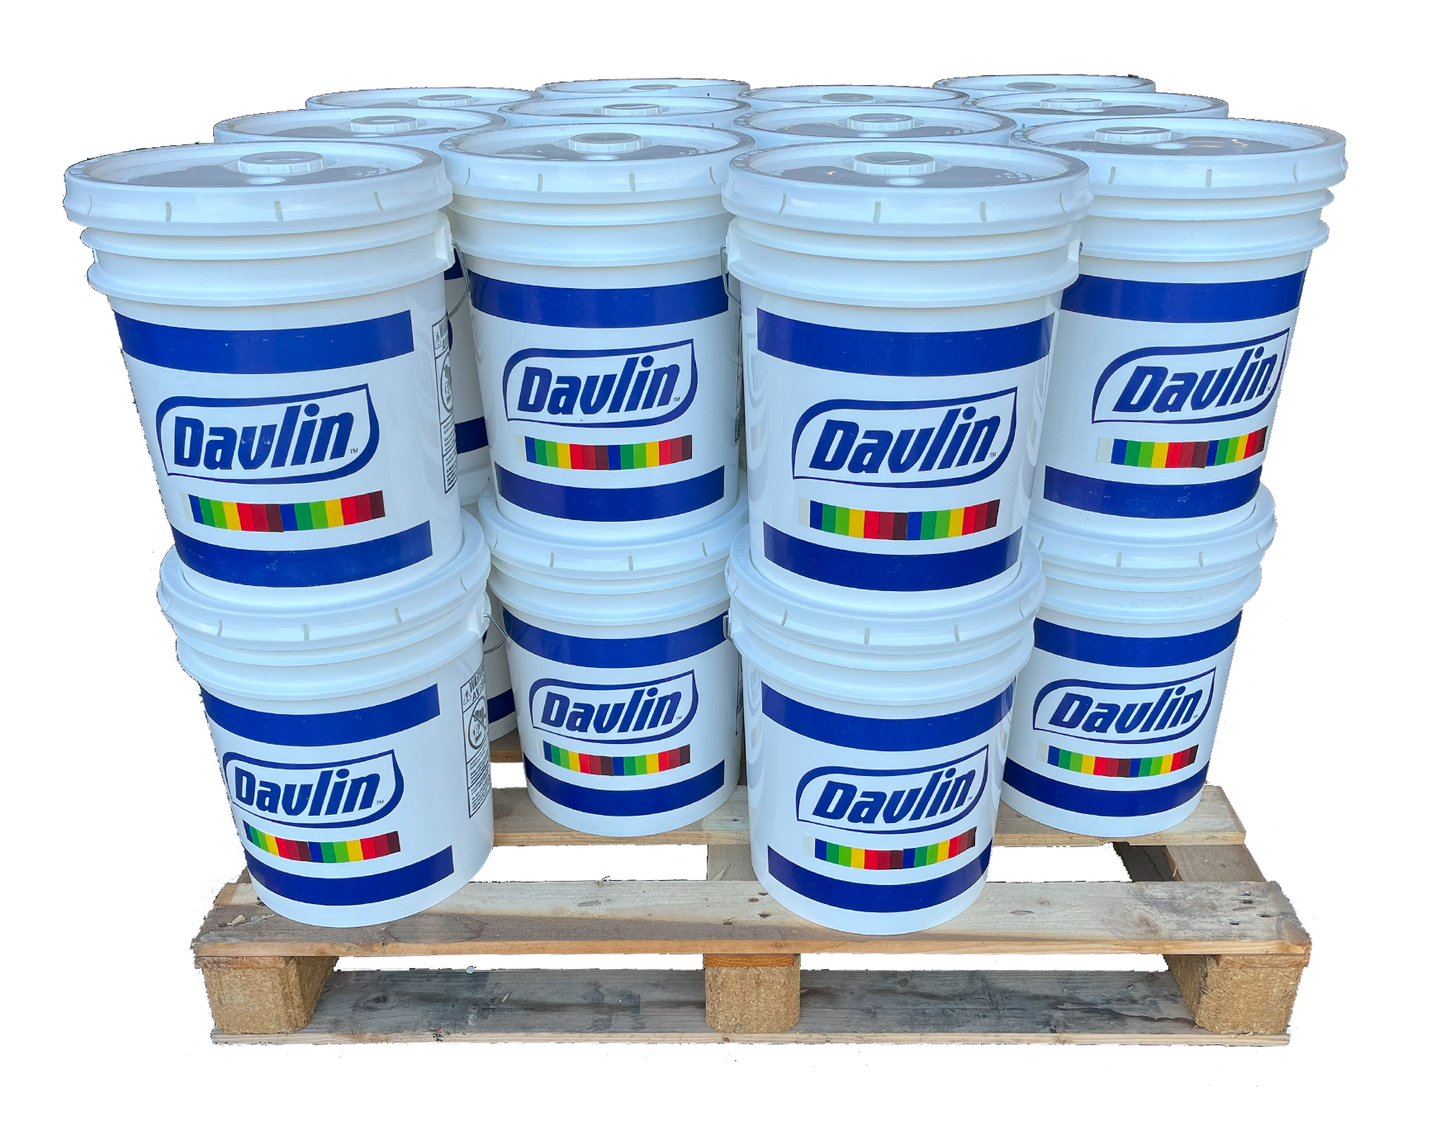 Interior/Exterior Paint in Bulk - All Sheens - Whole Pallet - Free Shipping - 24 x 5 gal Bucket - Custom Colors